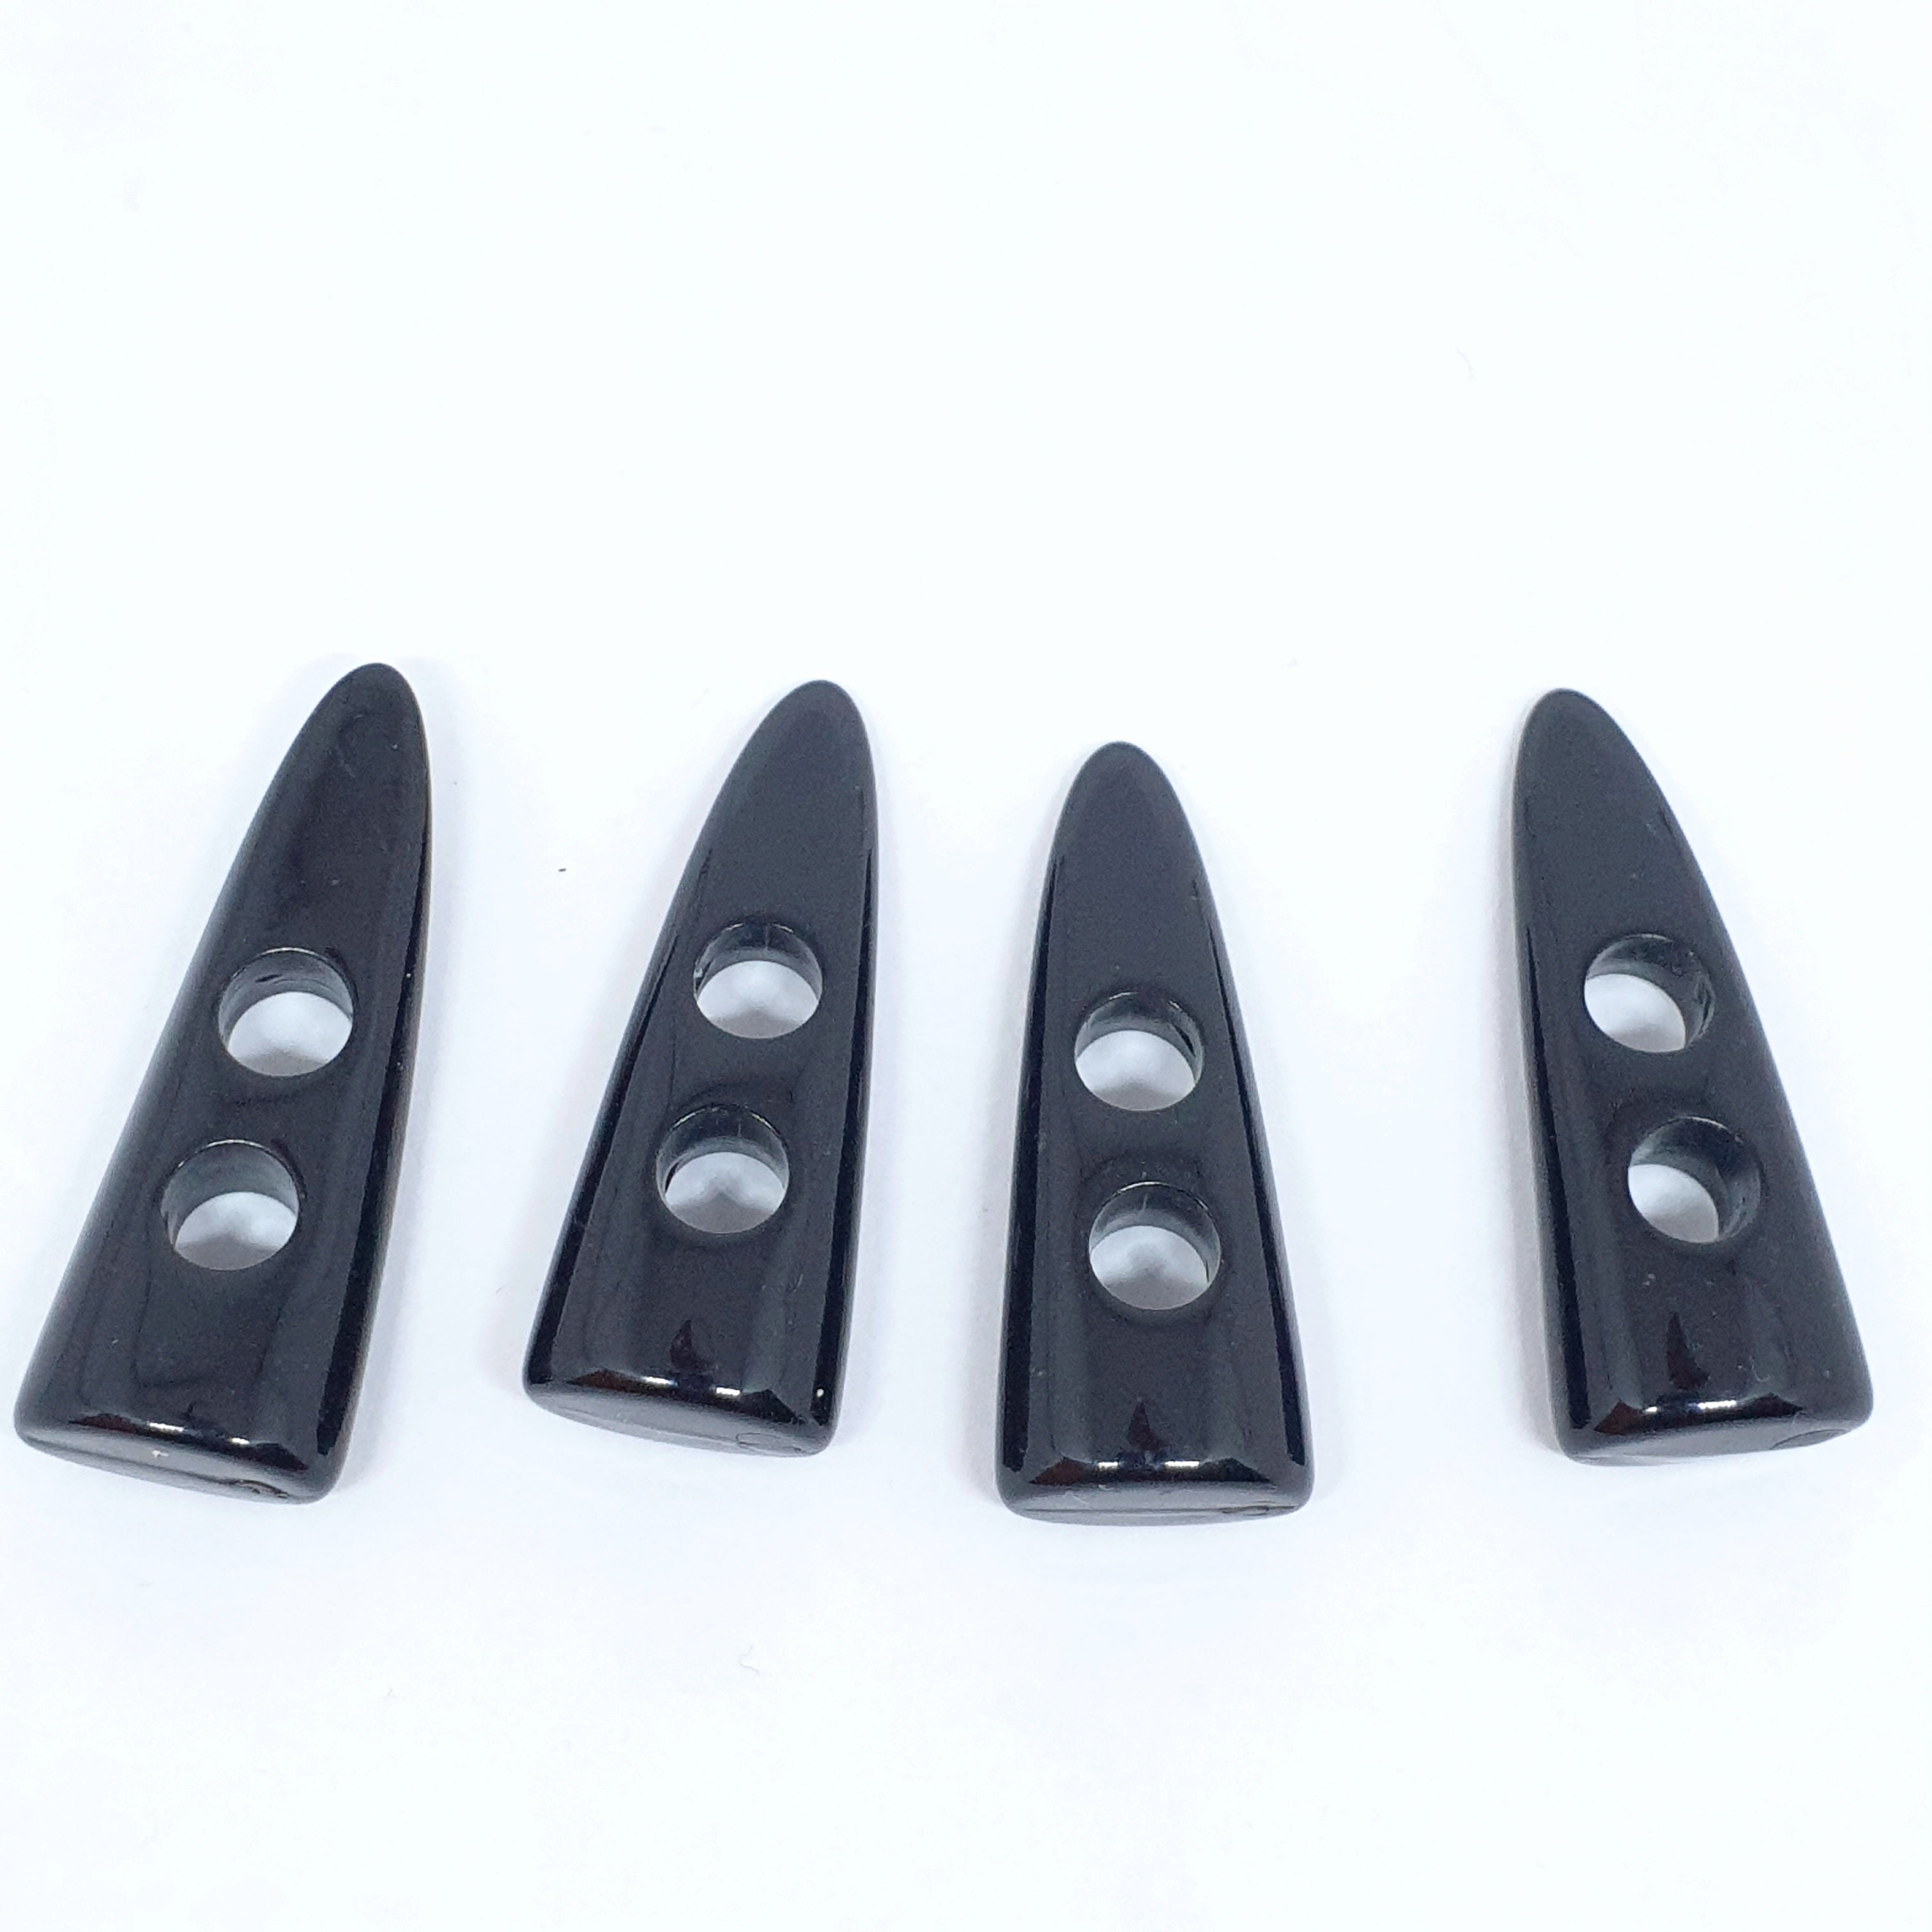 MajorCrafts 10pcs 40mm Black Horn/Tooth Forward Curved 2 Holes Sewing Toggle Large Acrylic Buttons